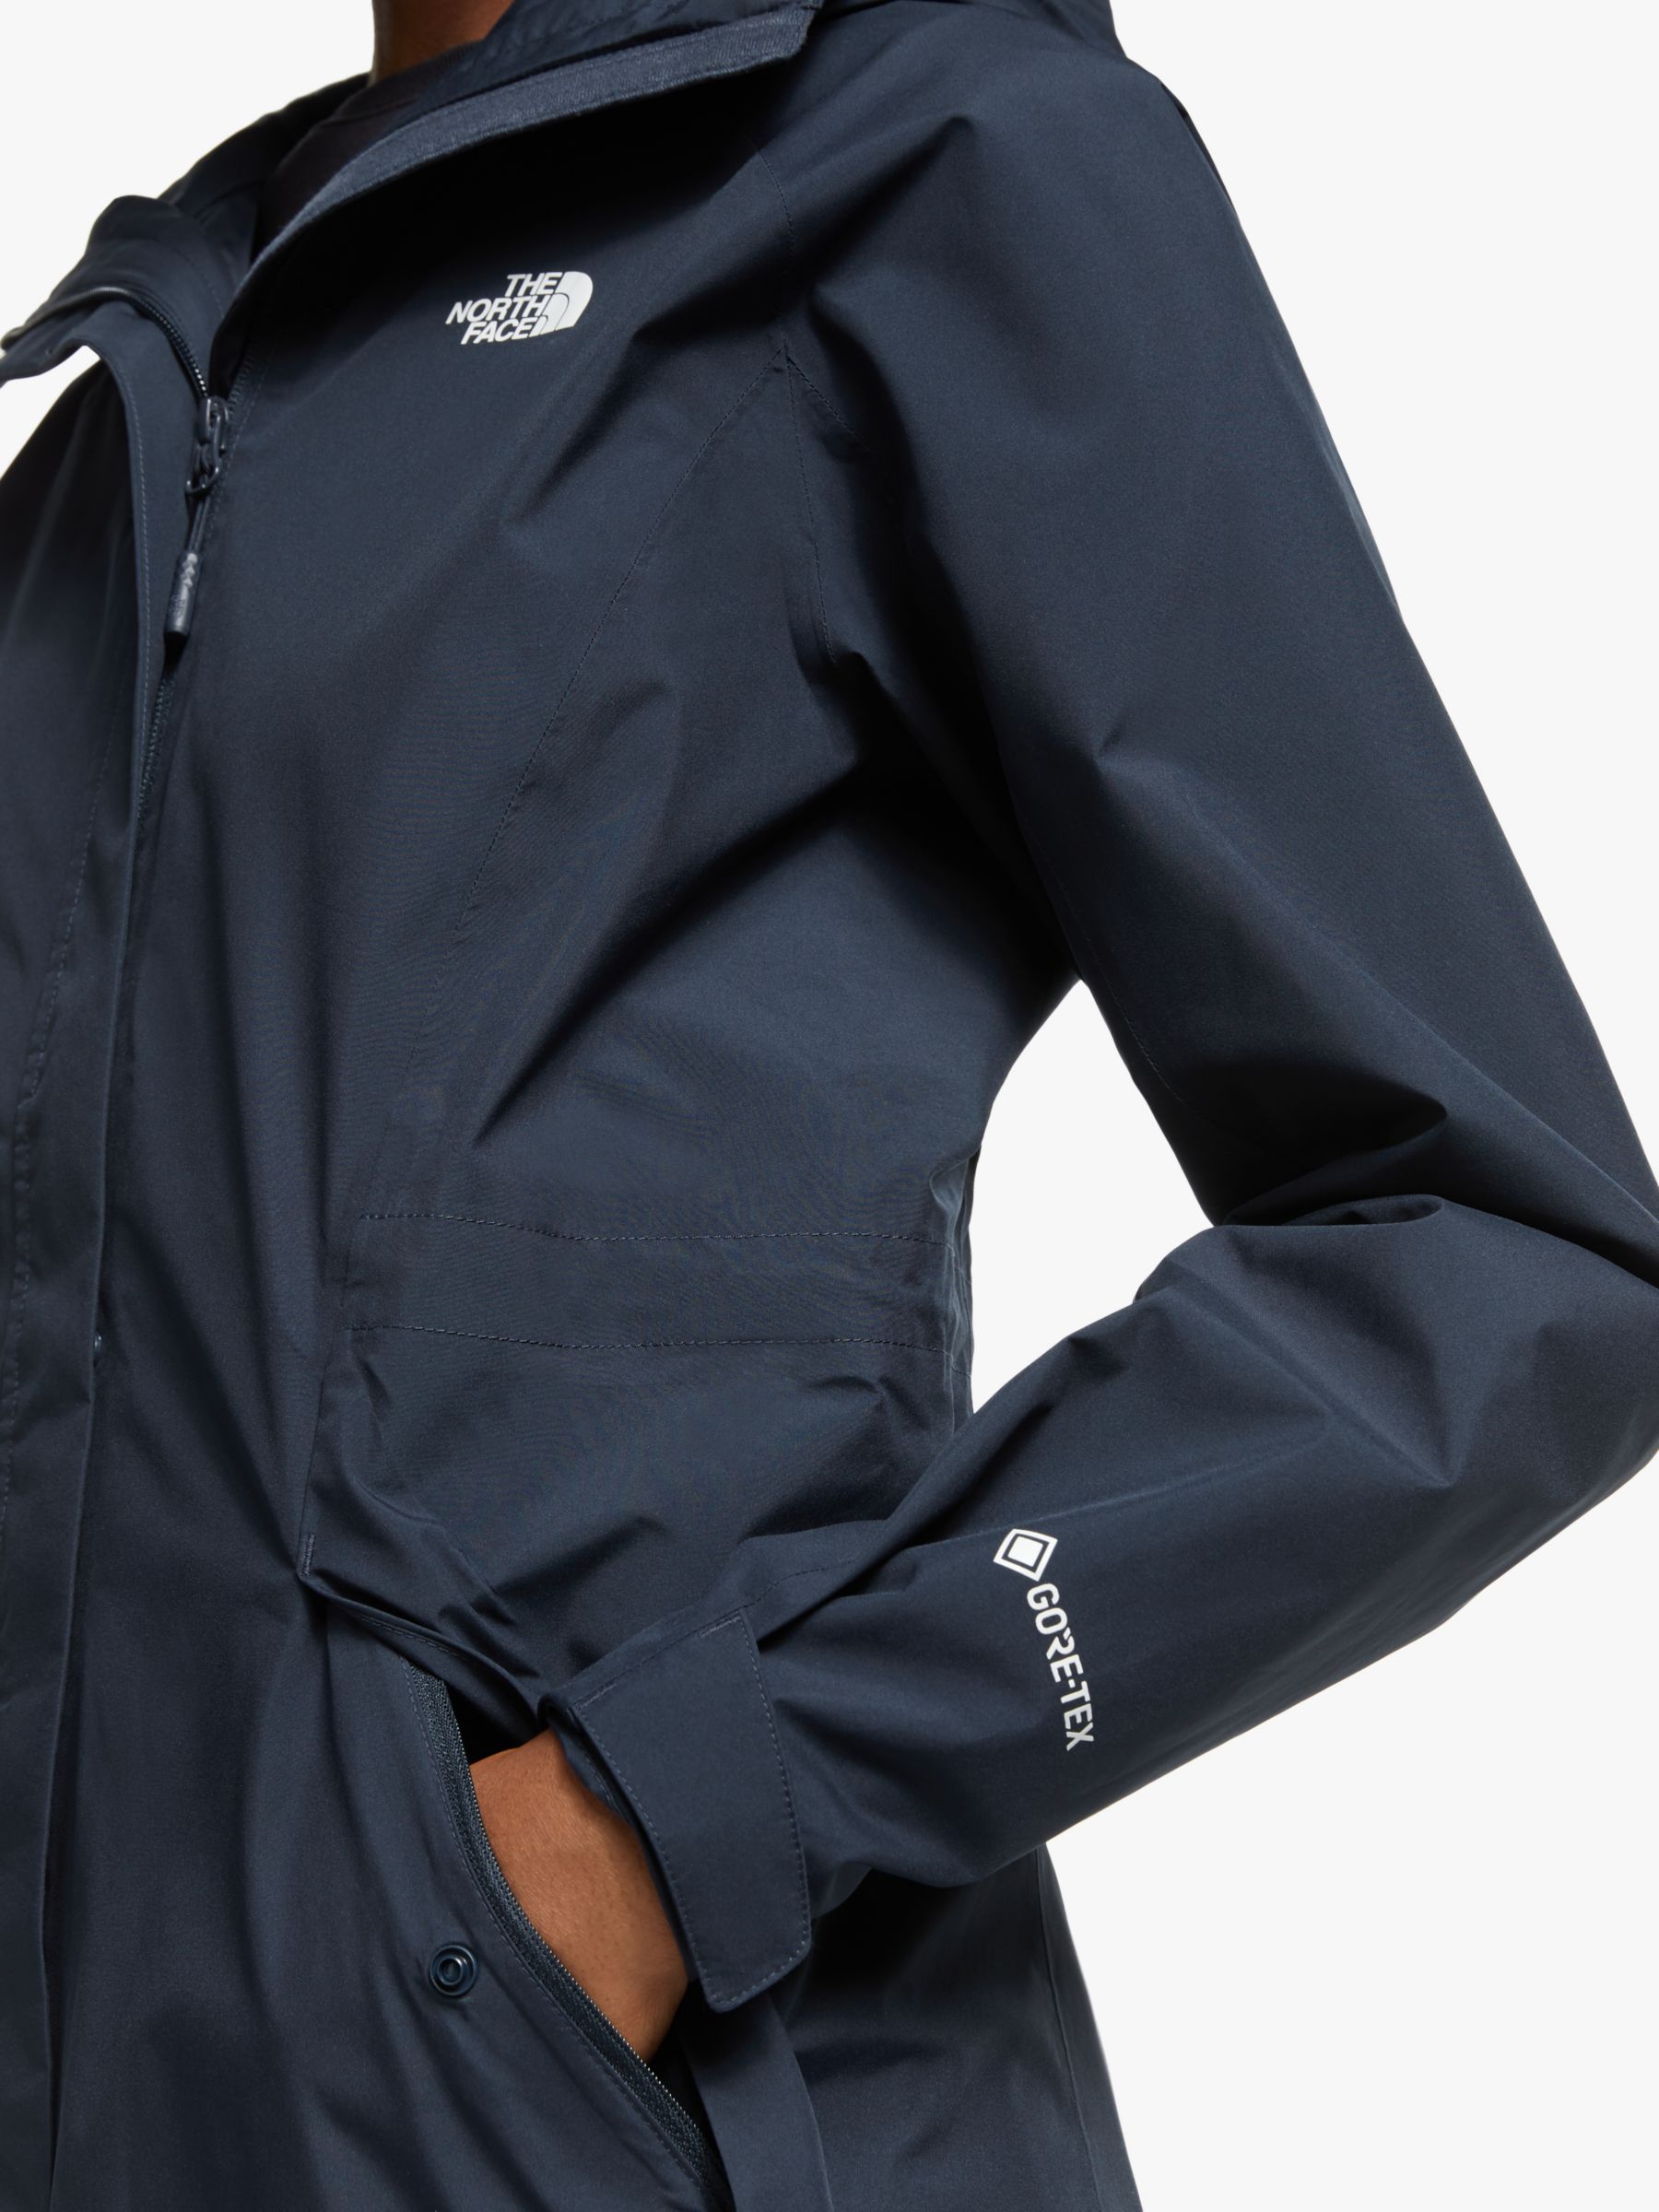 gore tex north face women's jacket